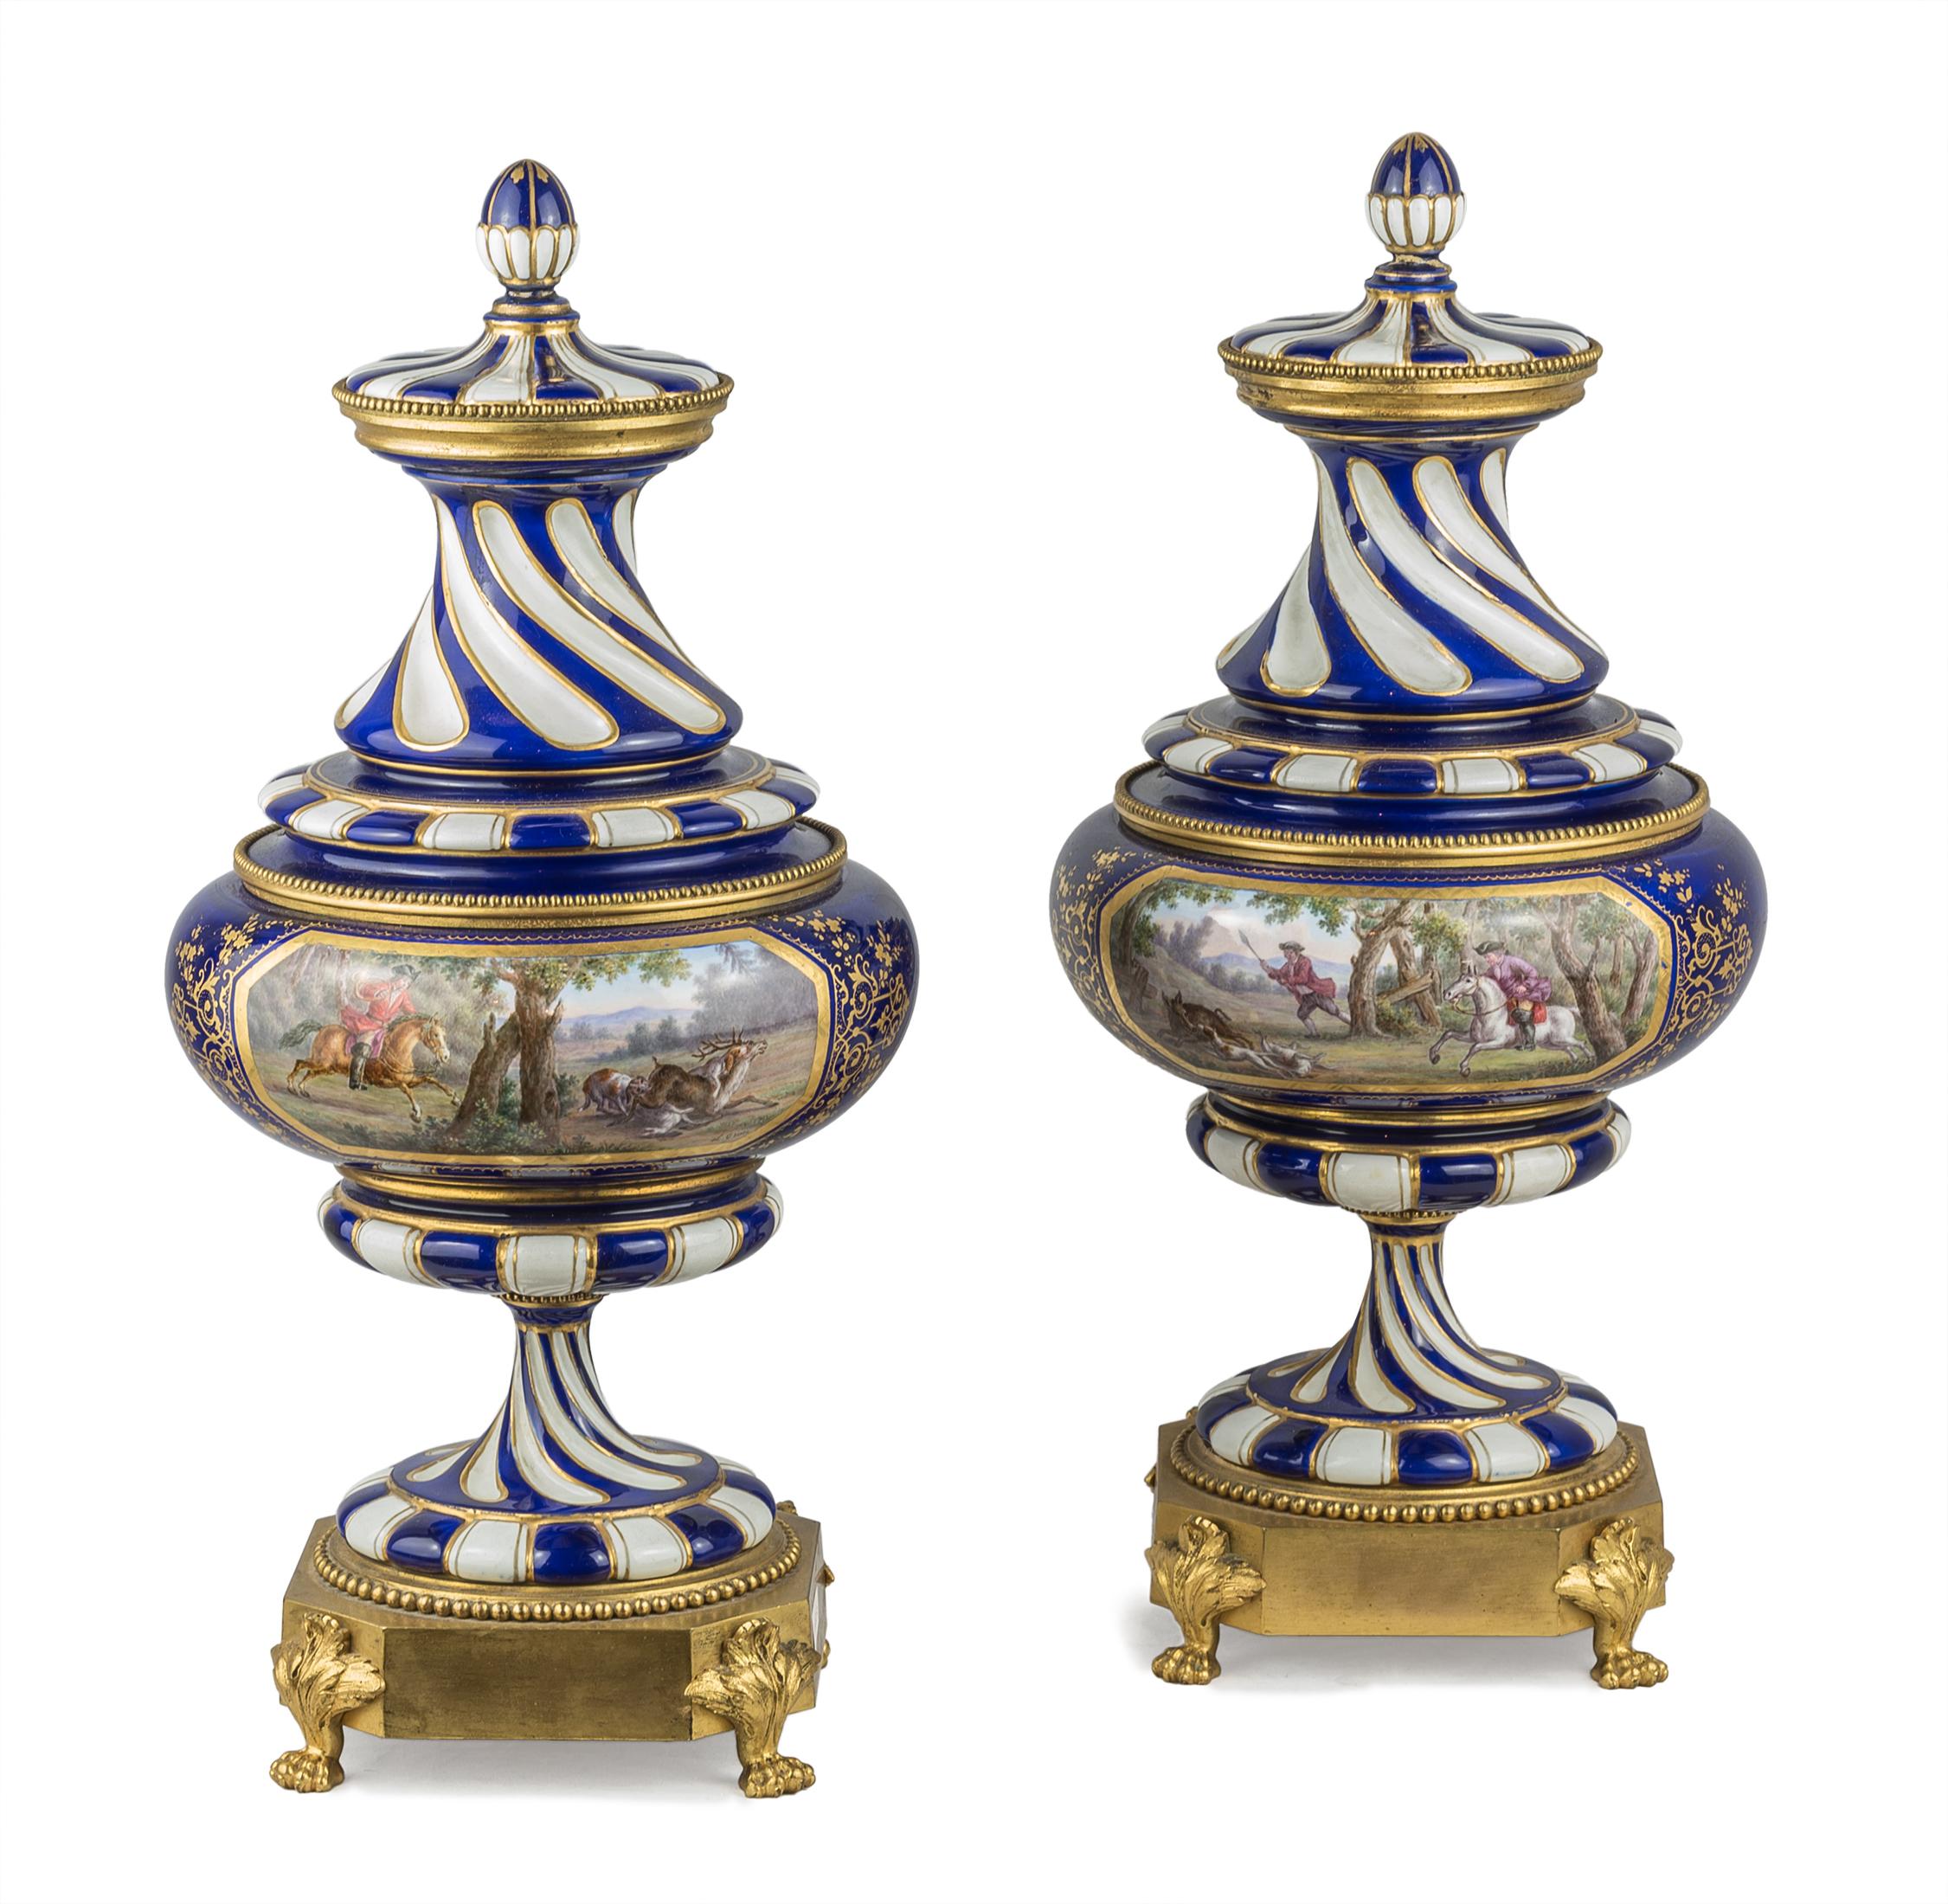 19th Century French Sèvres-style Gilt Bronze and Jeweled Porcelain Clock Set For Sale